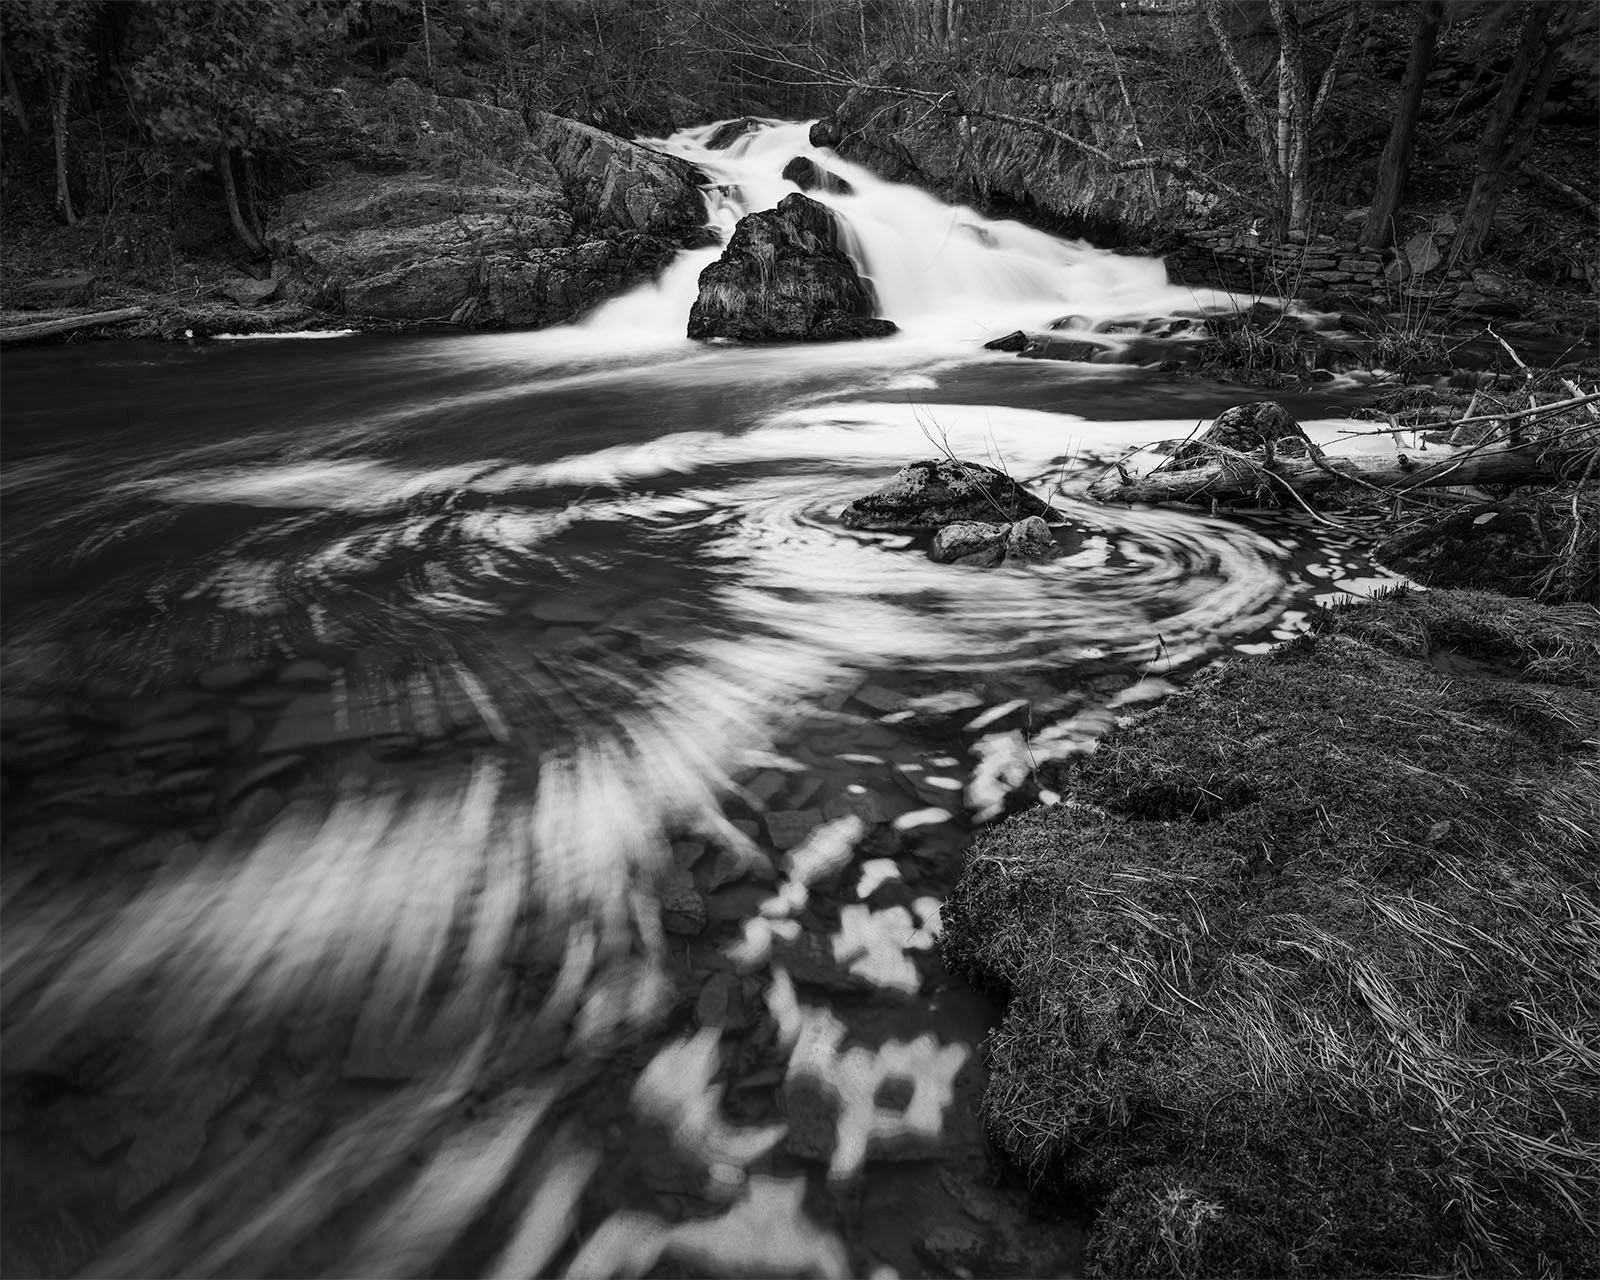 Black and white photo of a flowing stream with cascading rapids swirling around a central rock, bordered by forest and patches of grass.